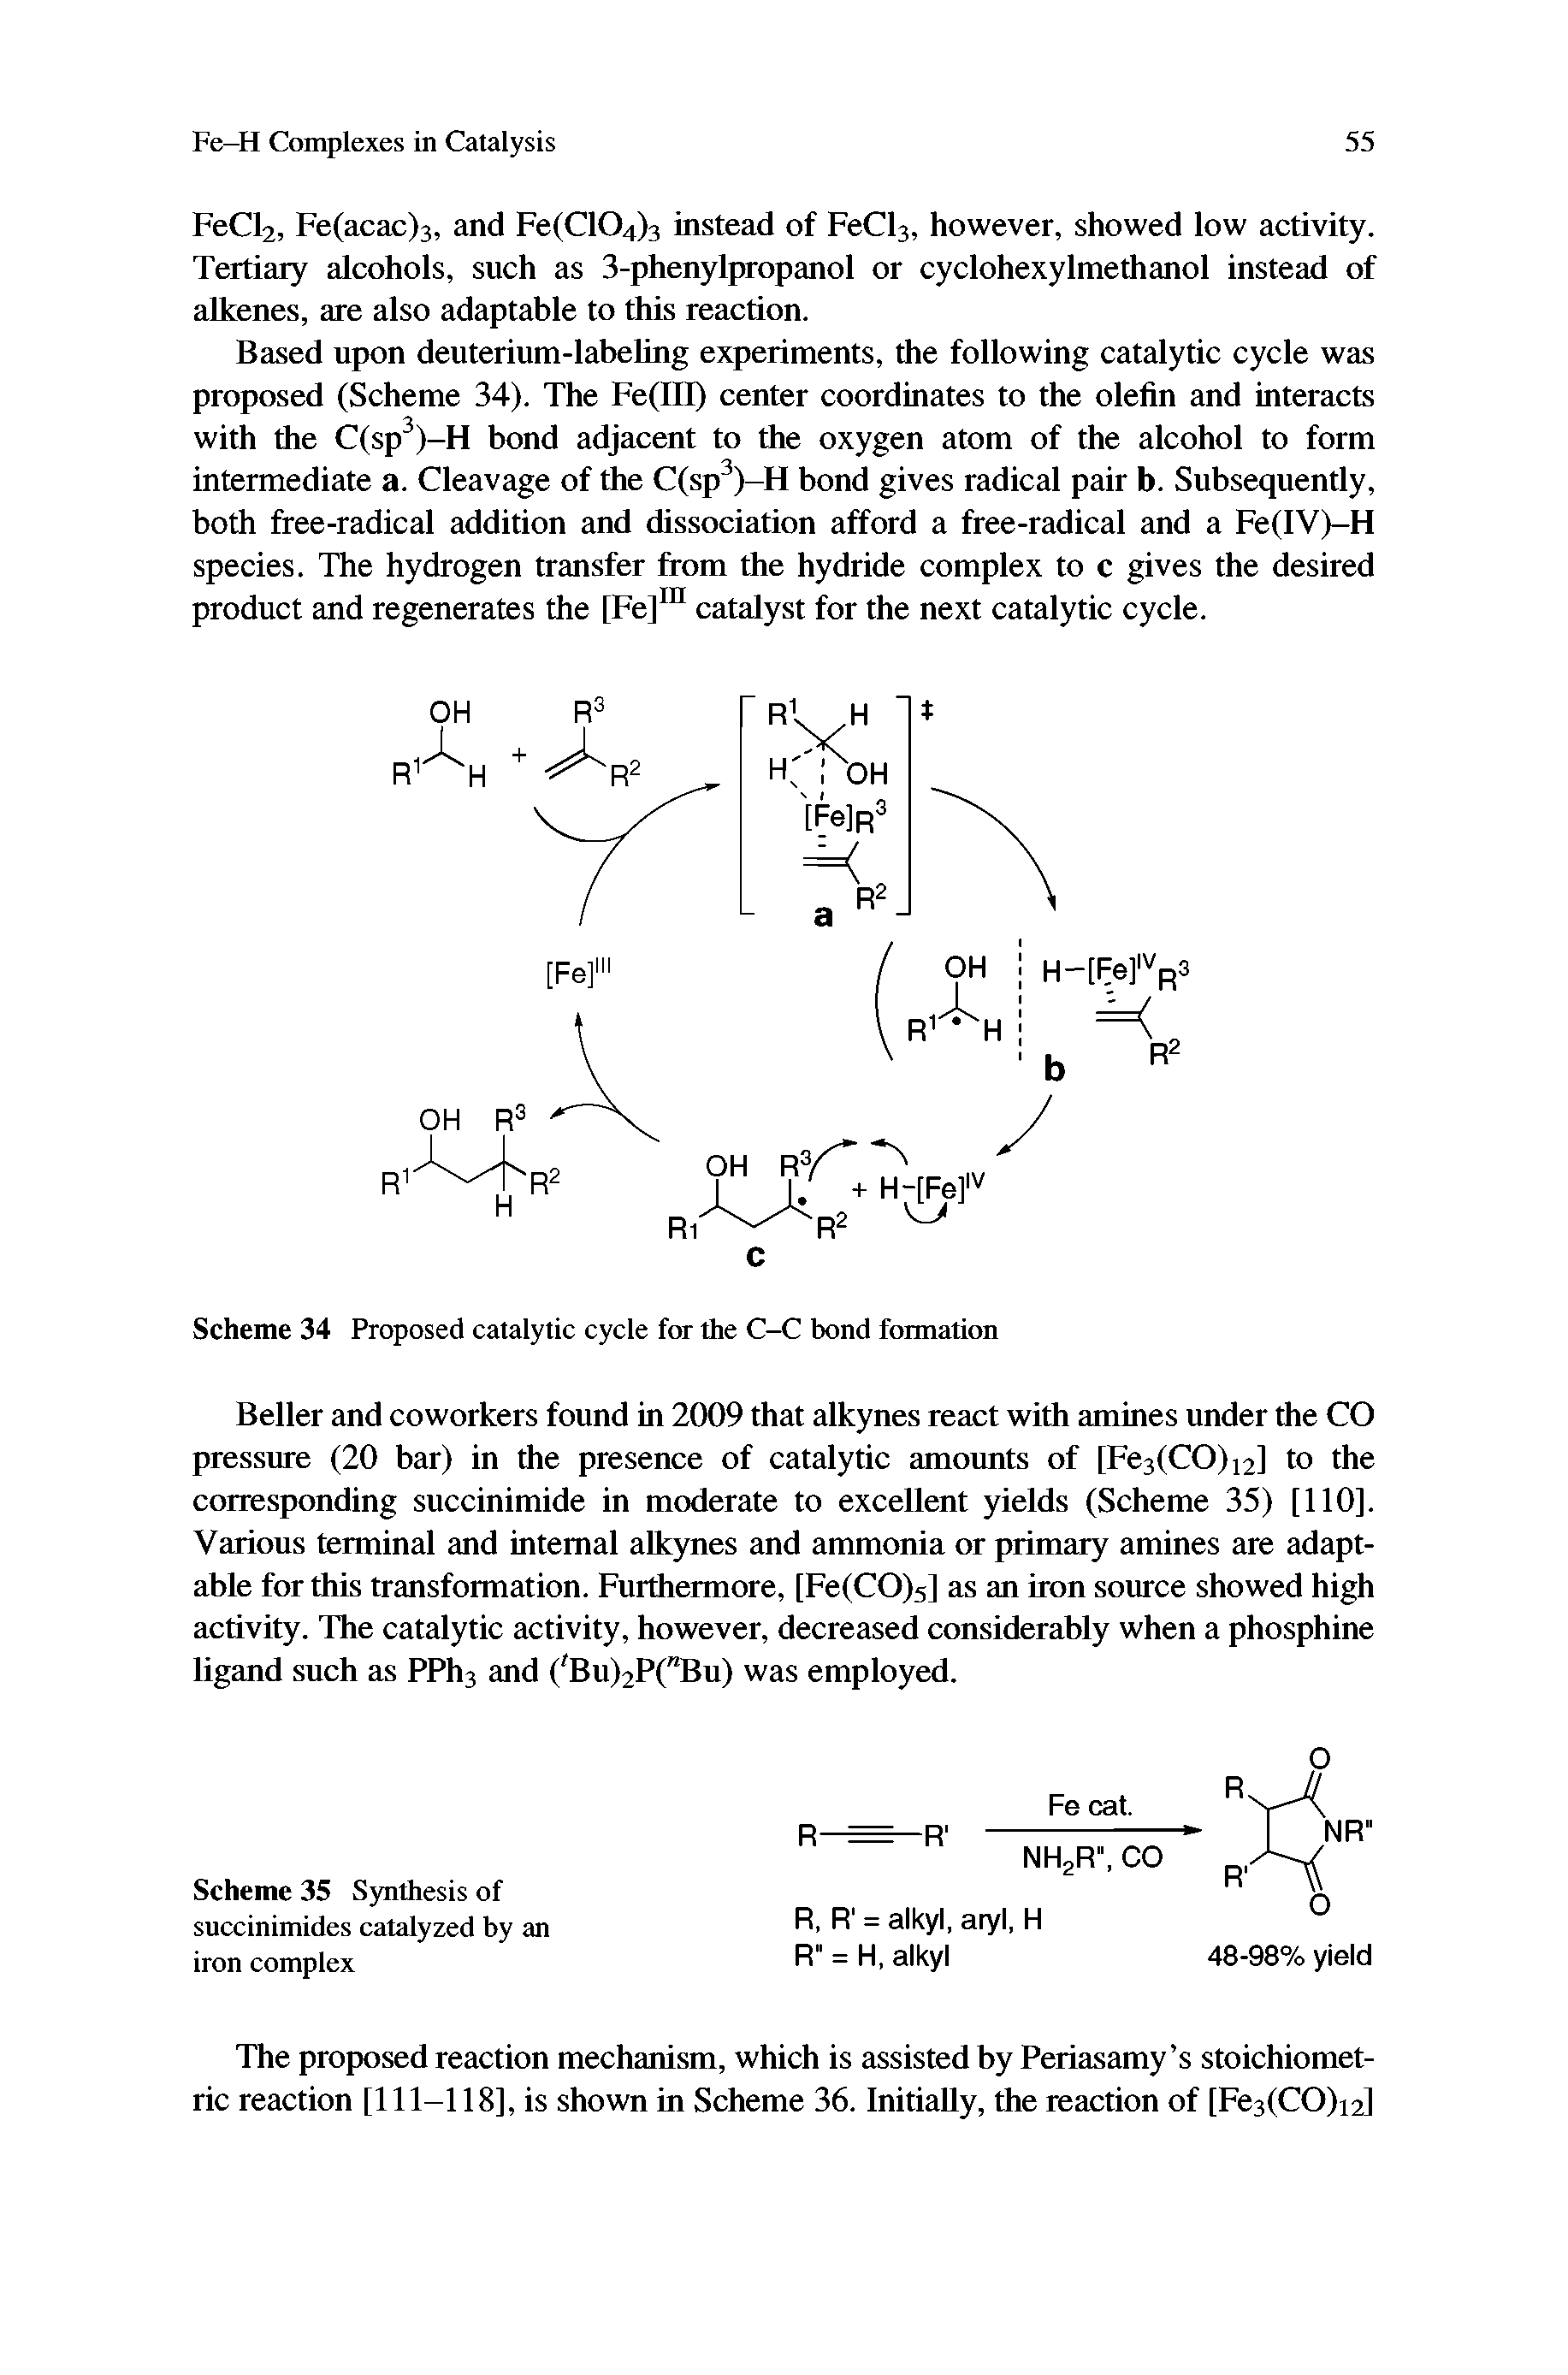 Scheme 35 Synthesis of succinimides catalyzed by an iron complex...